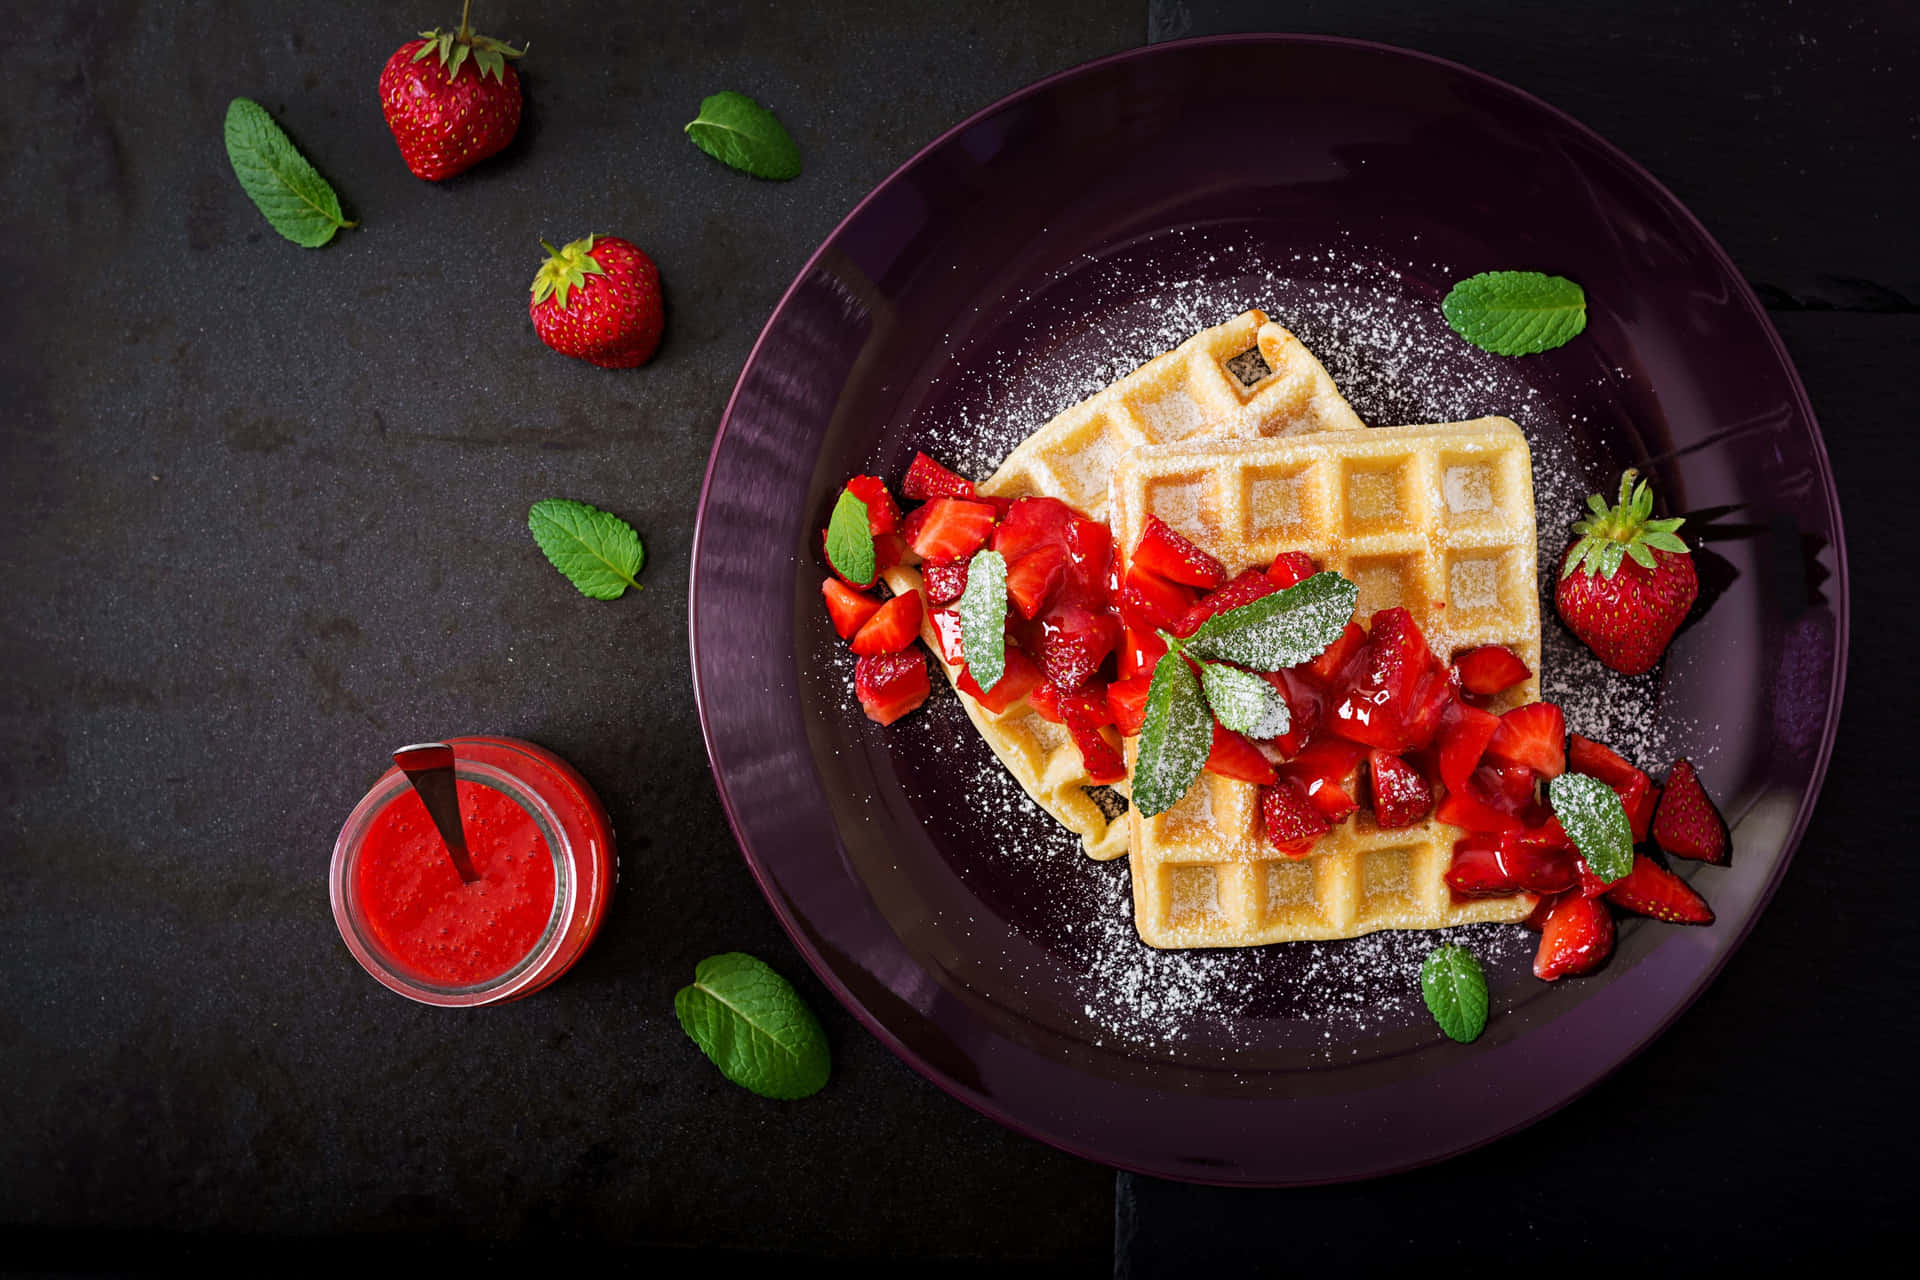 Enjoy delicious waffles any day of the week